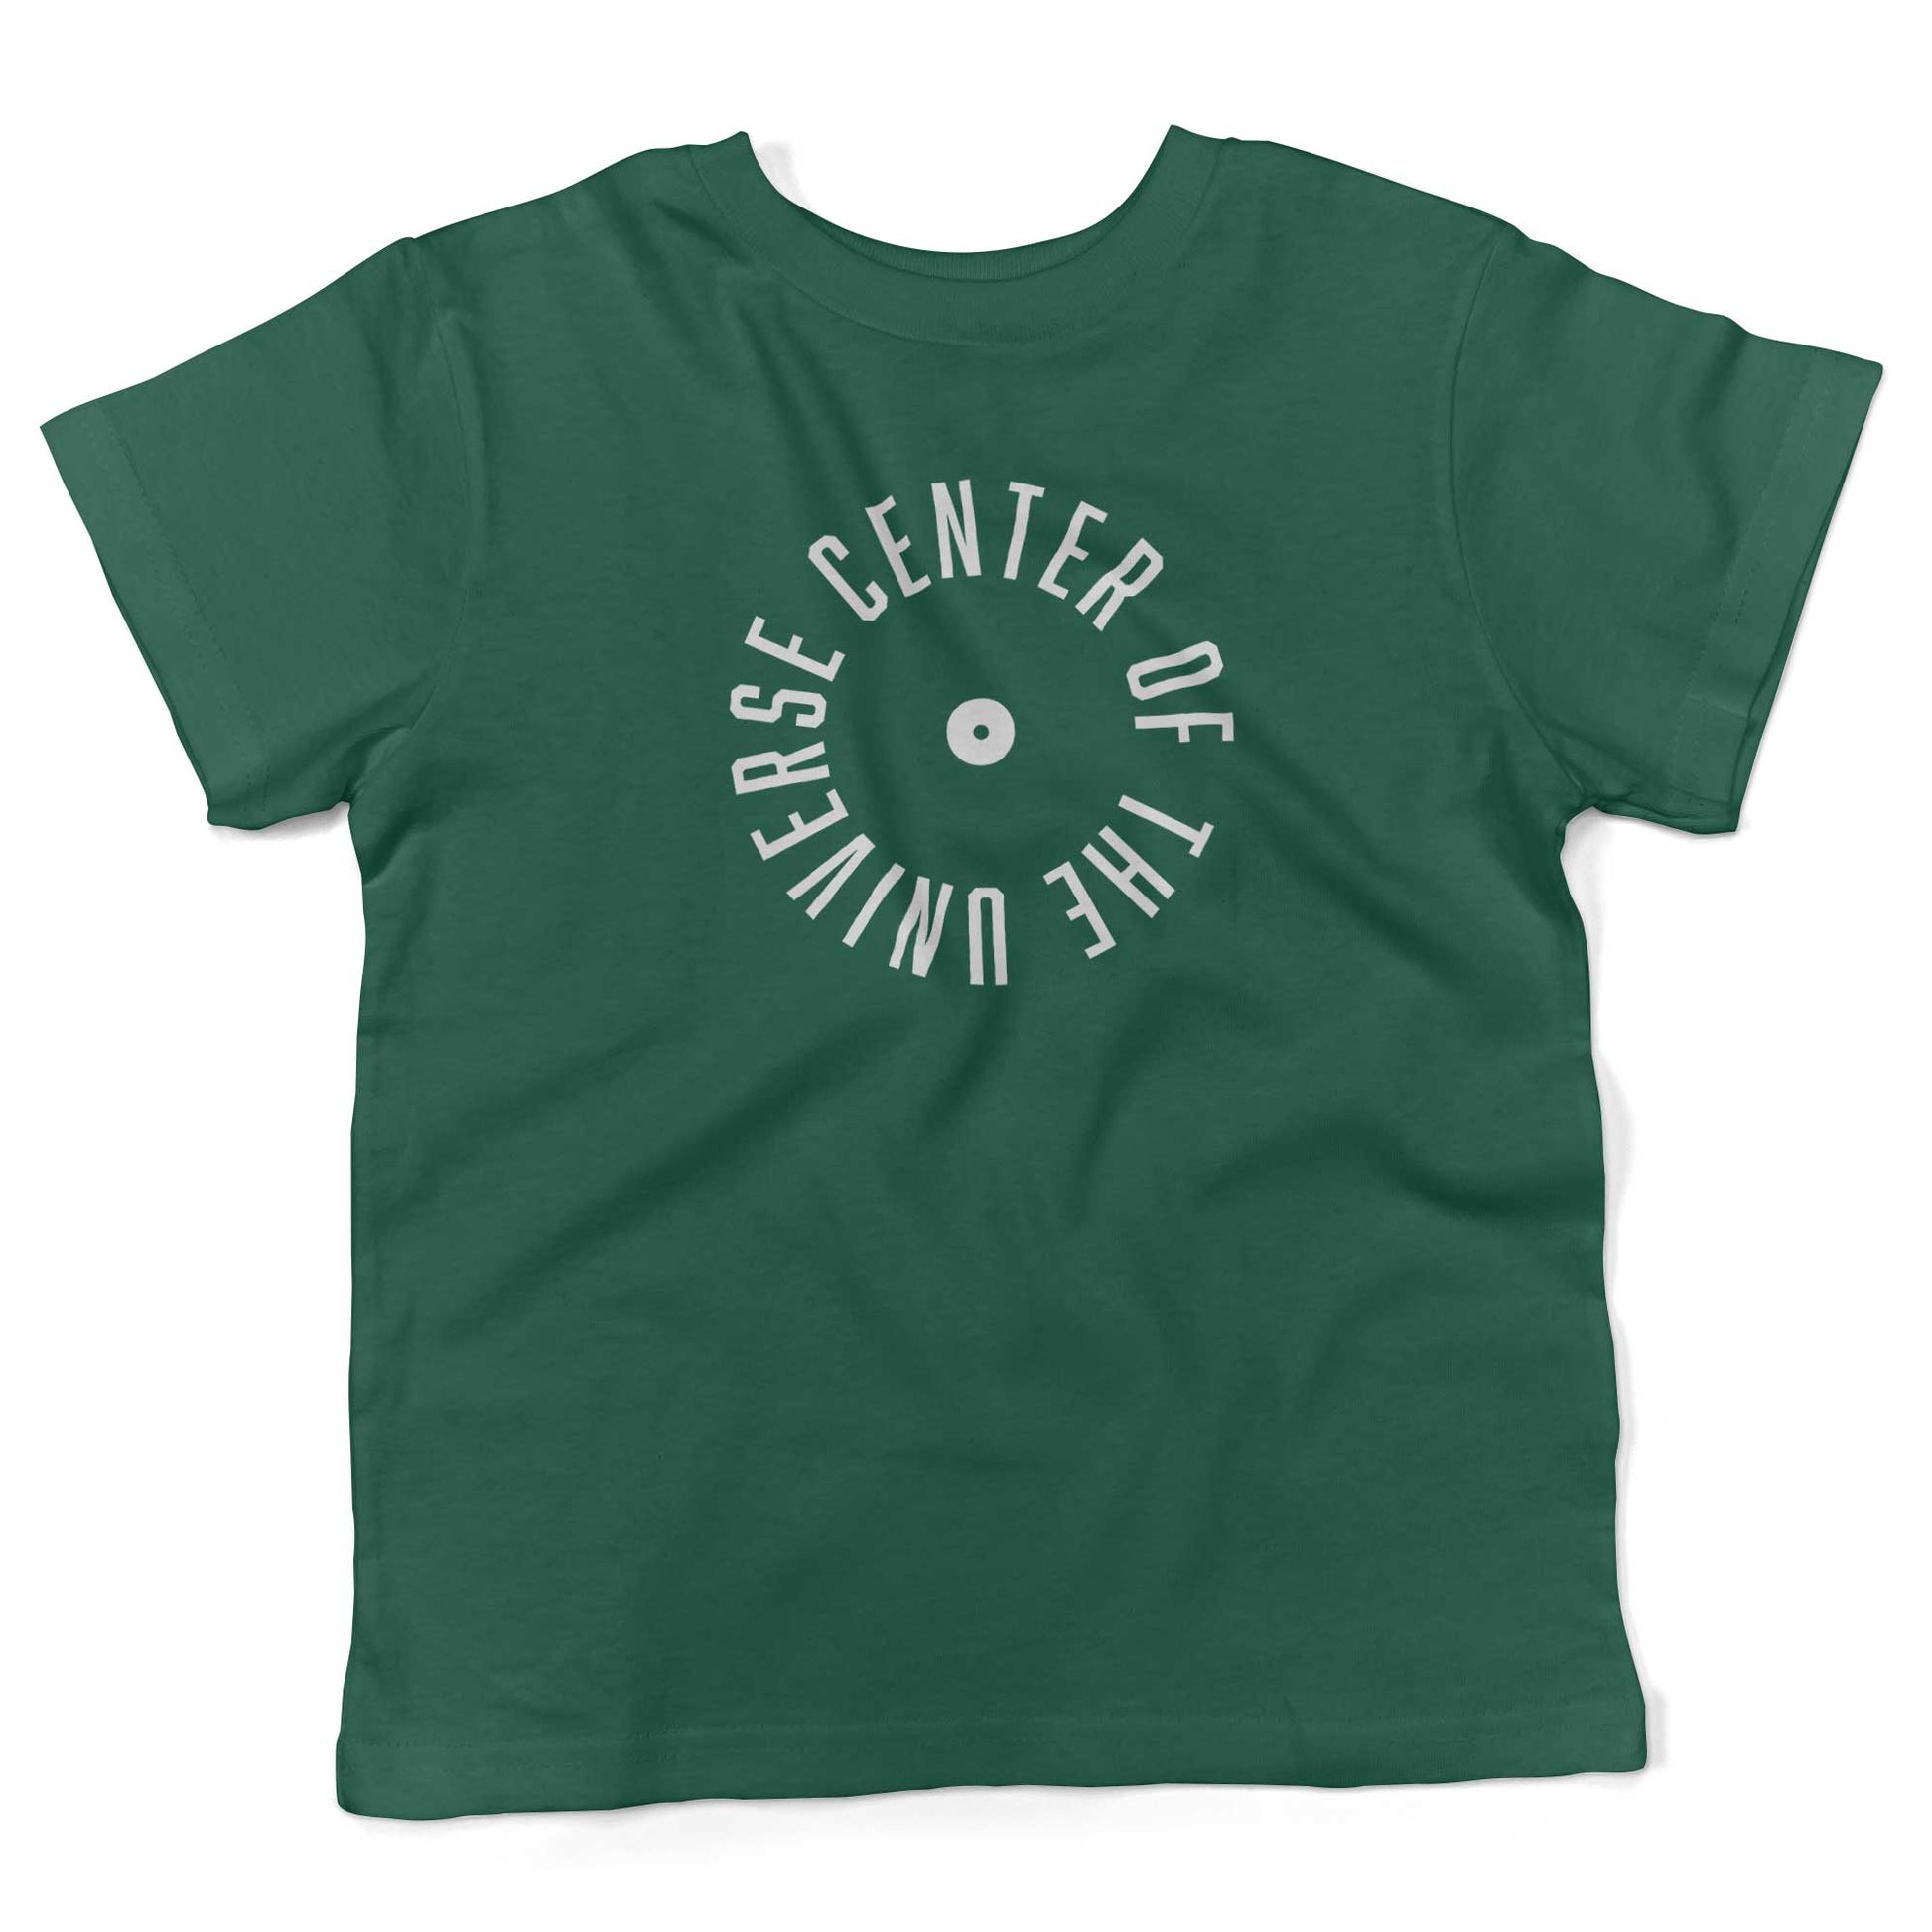 Center Of The Universe Toddler Shirt-Kelly Green-2T